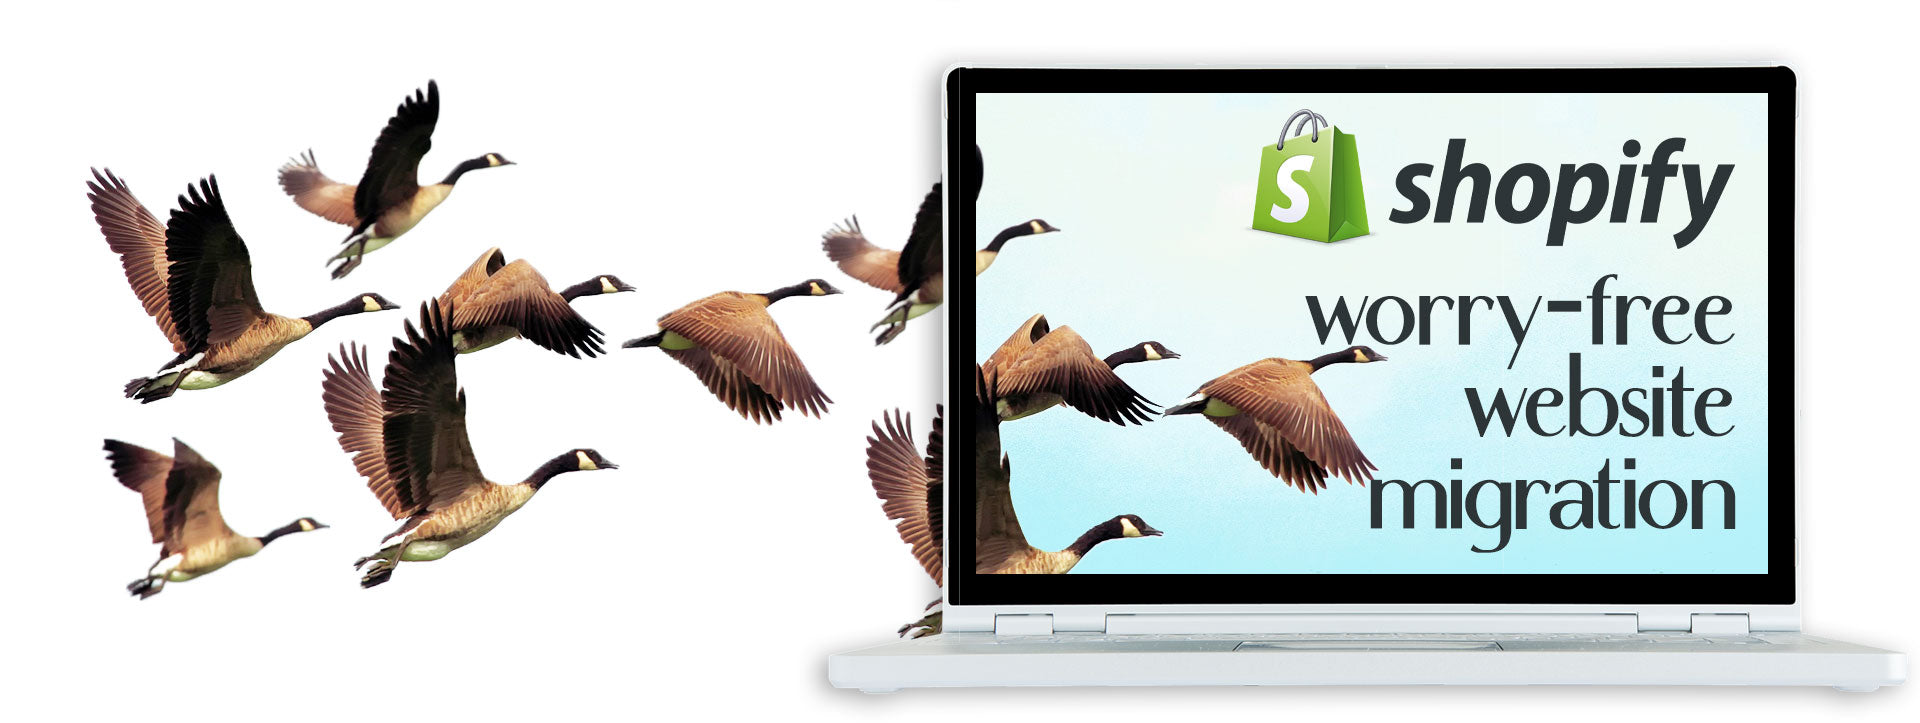 Worry Free Website Migrations to Shopify by 2FriendsDesigns